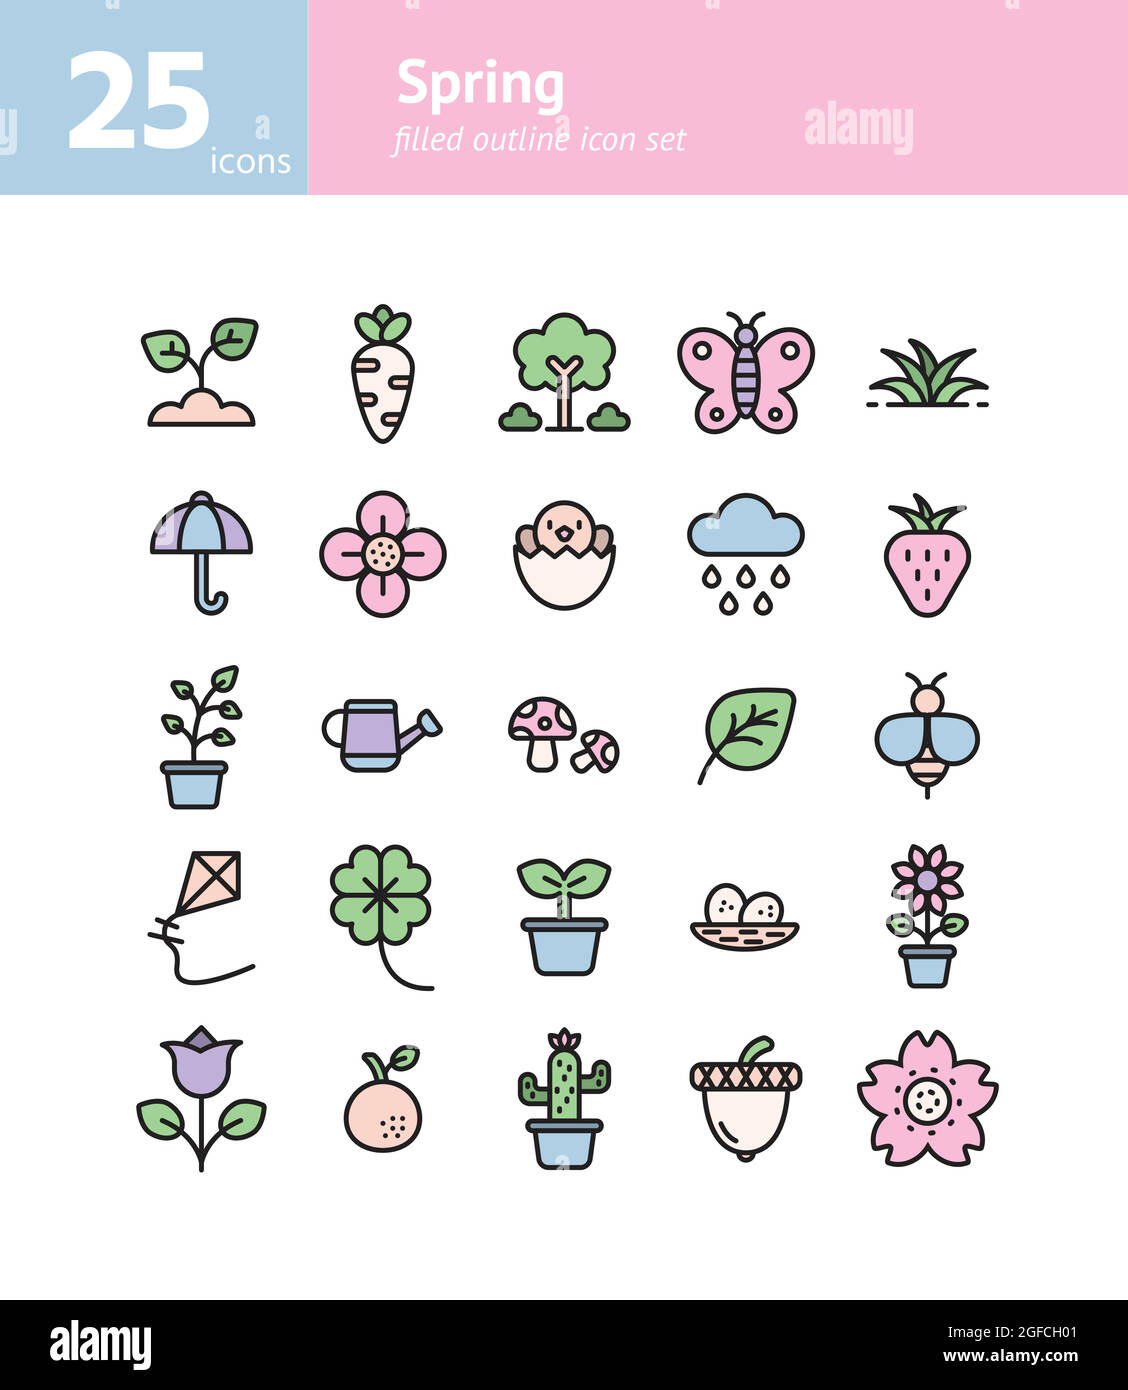 Spring filled outline icon set. Vector and Illustration. Stock Vector